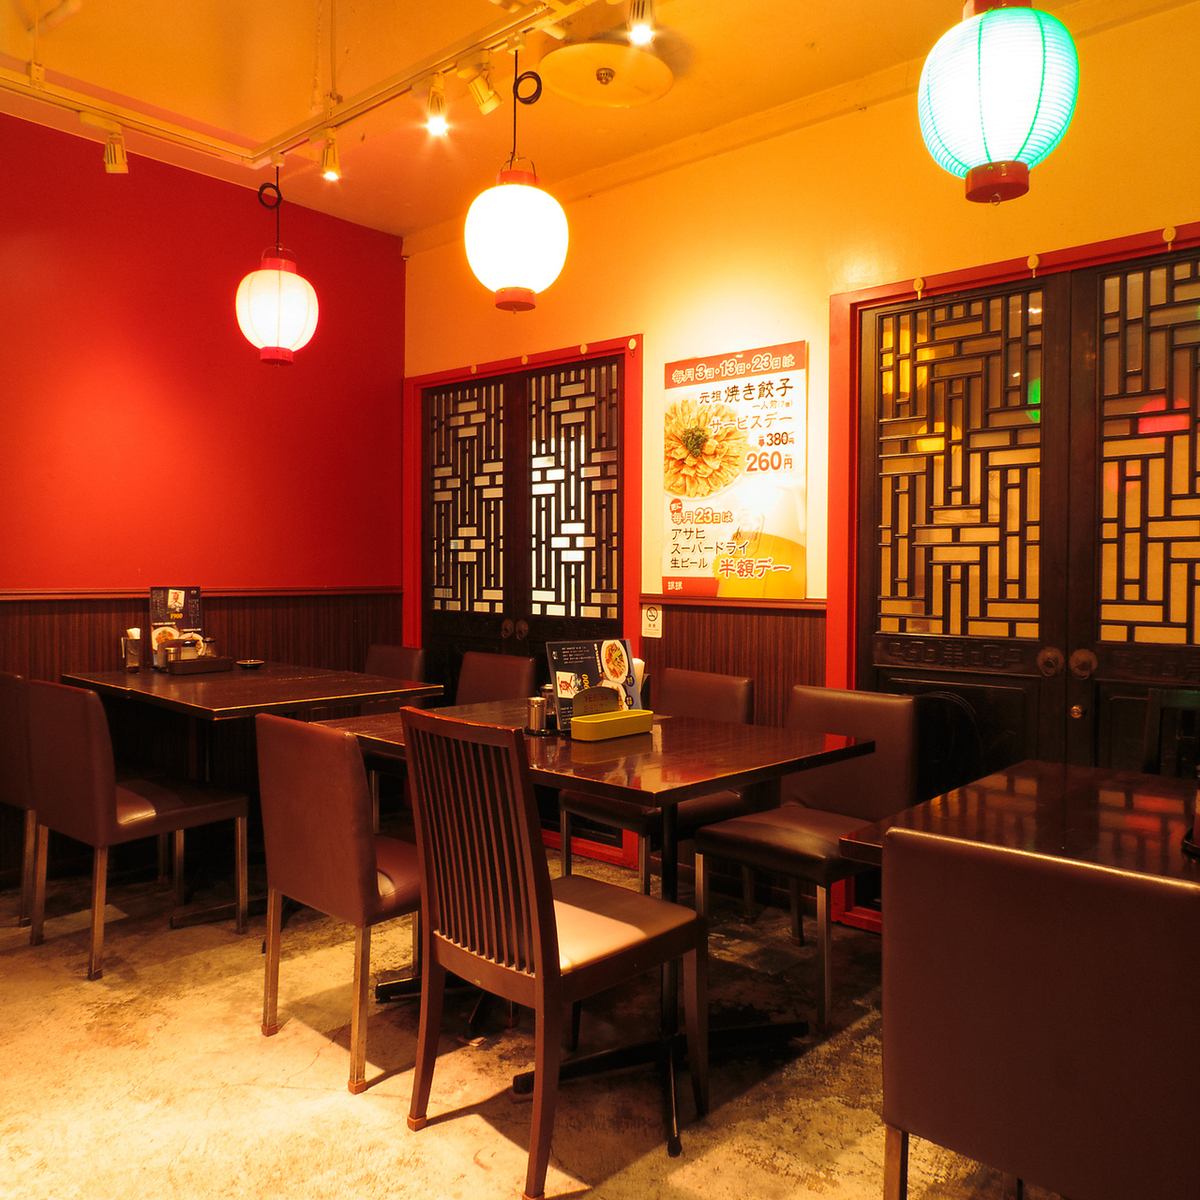 ◎A restaurant where you can enjoy authentic Chinese food◎